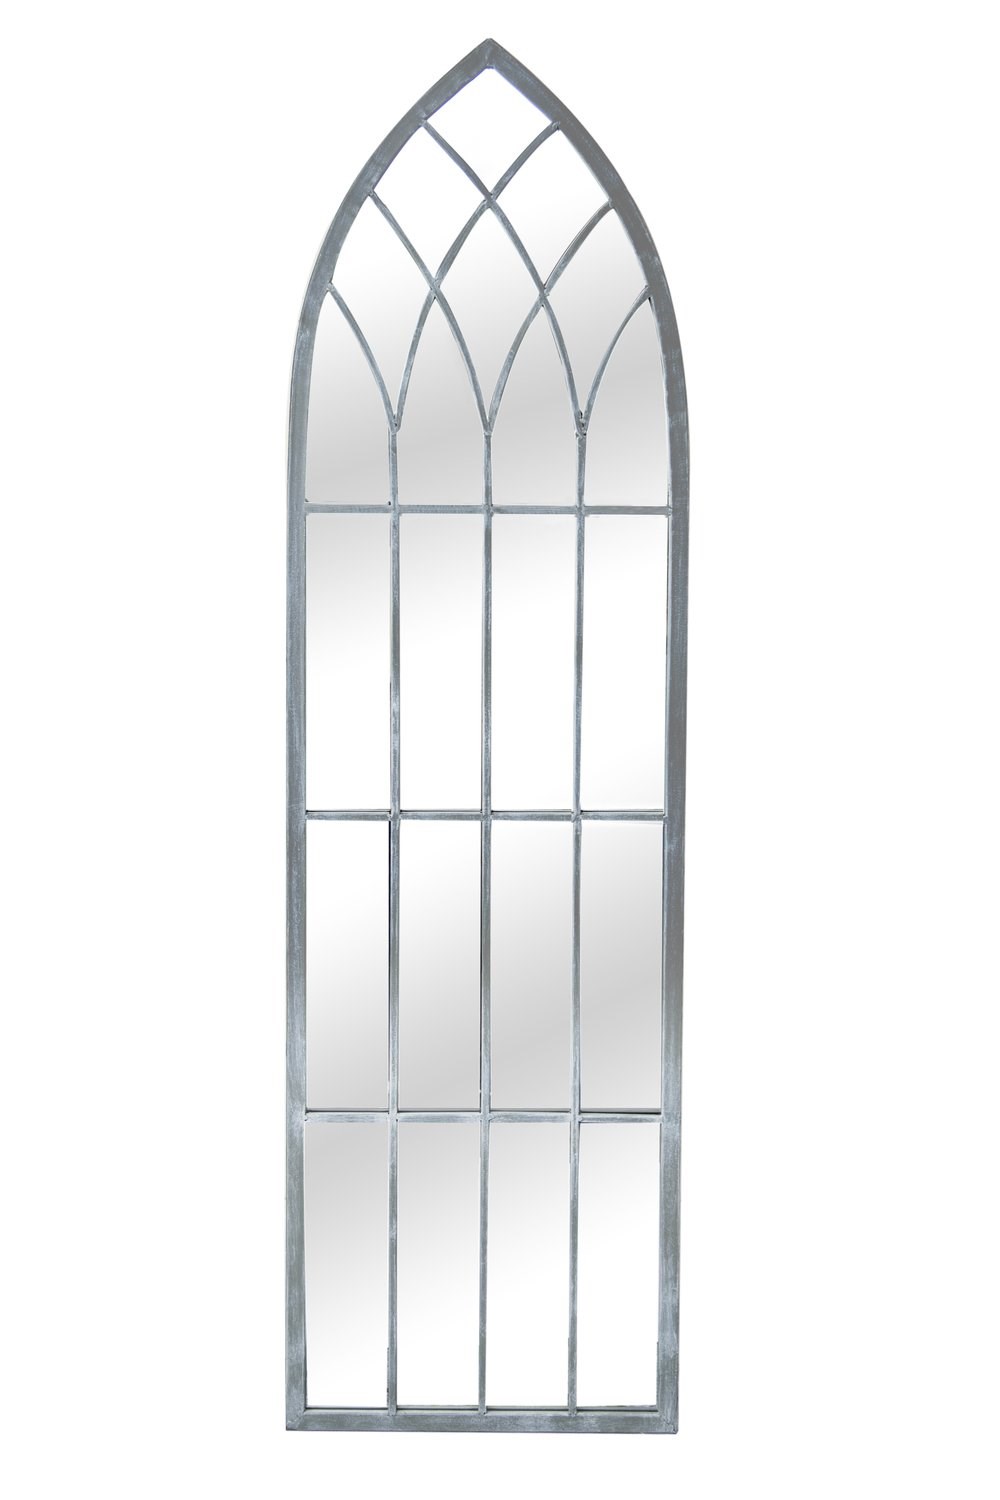 4ft 7in x 1ft 3in Metal Gothic Glass Garden Mirror - by Reflect™